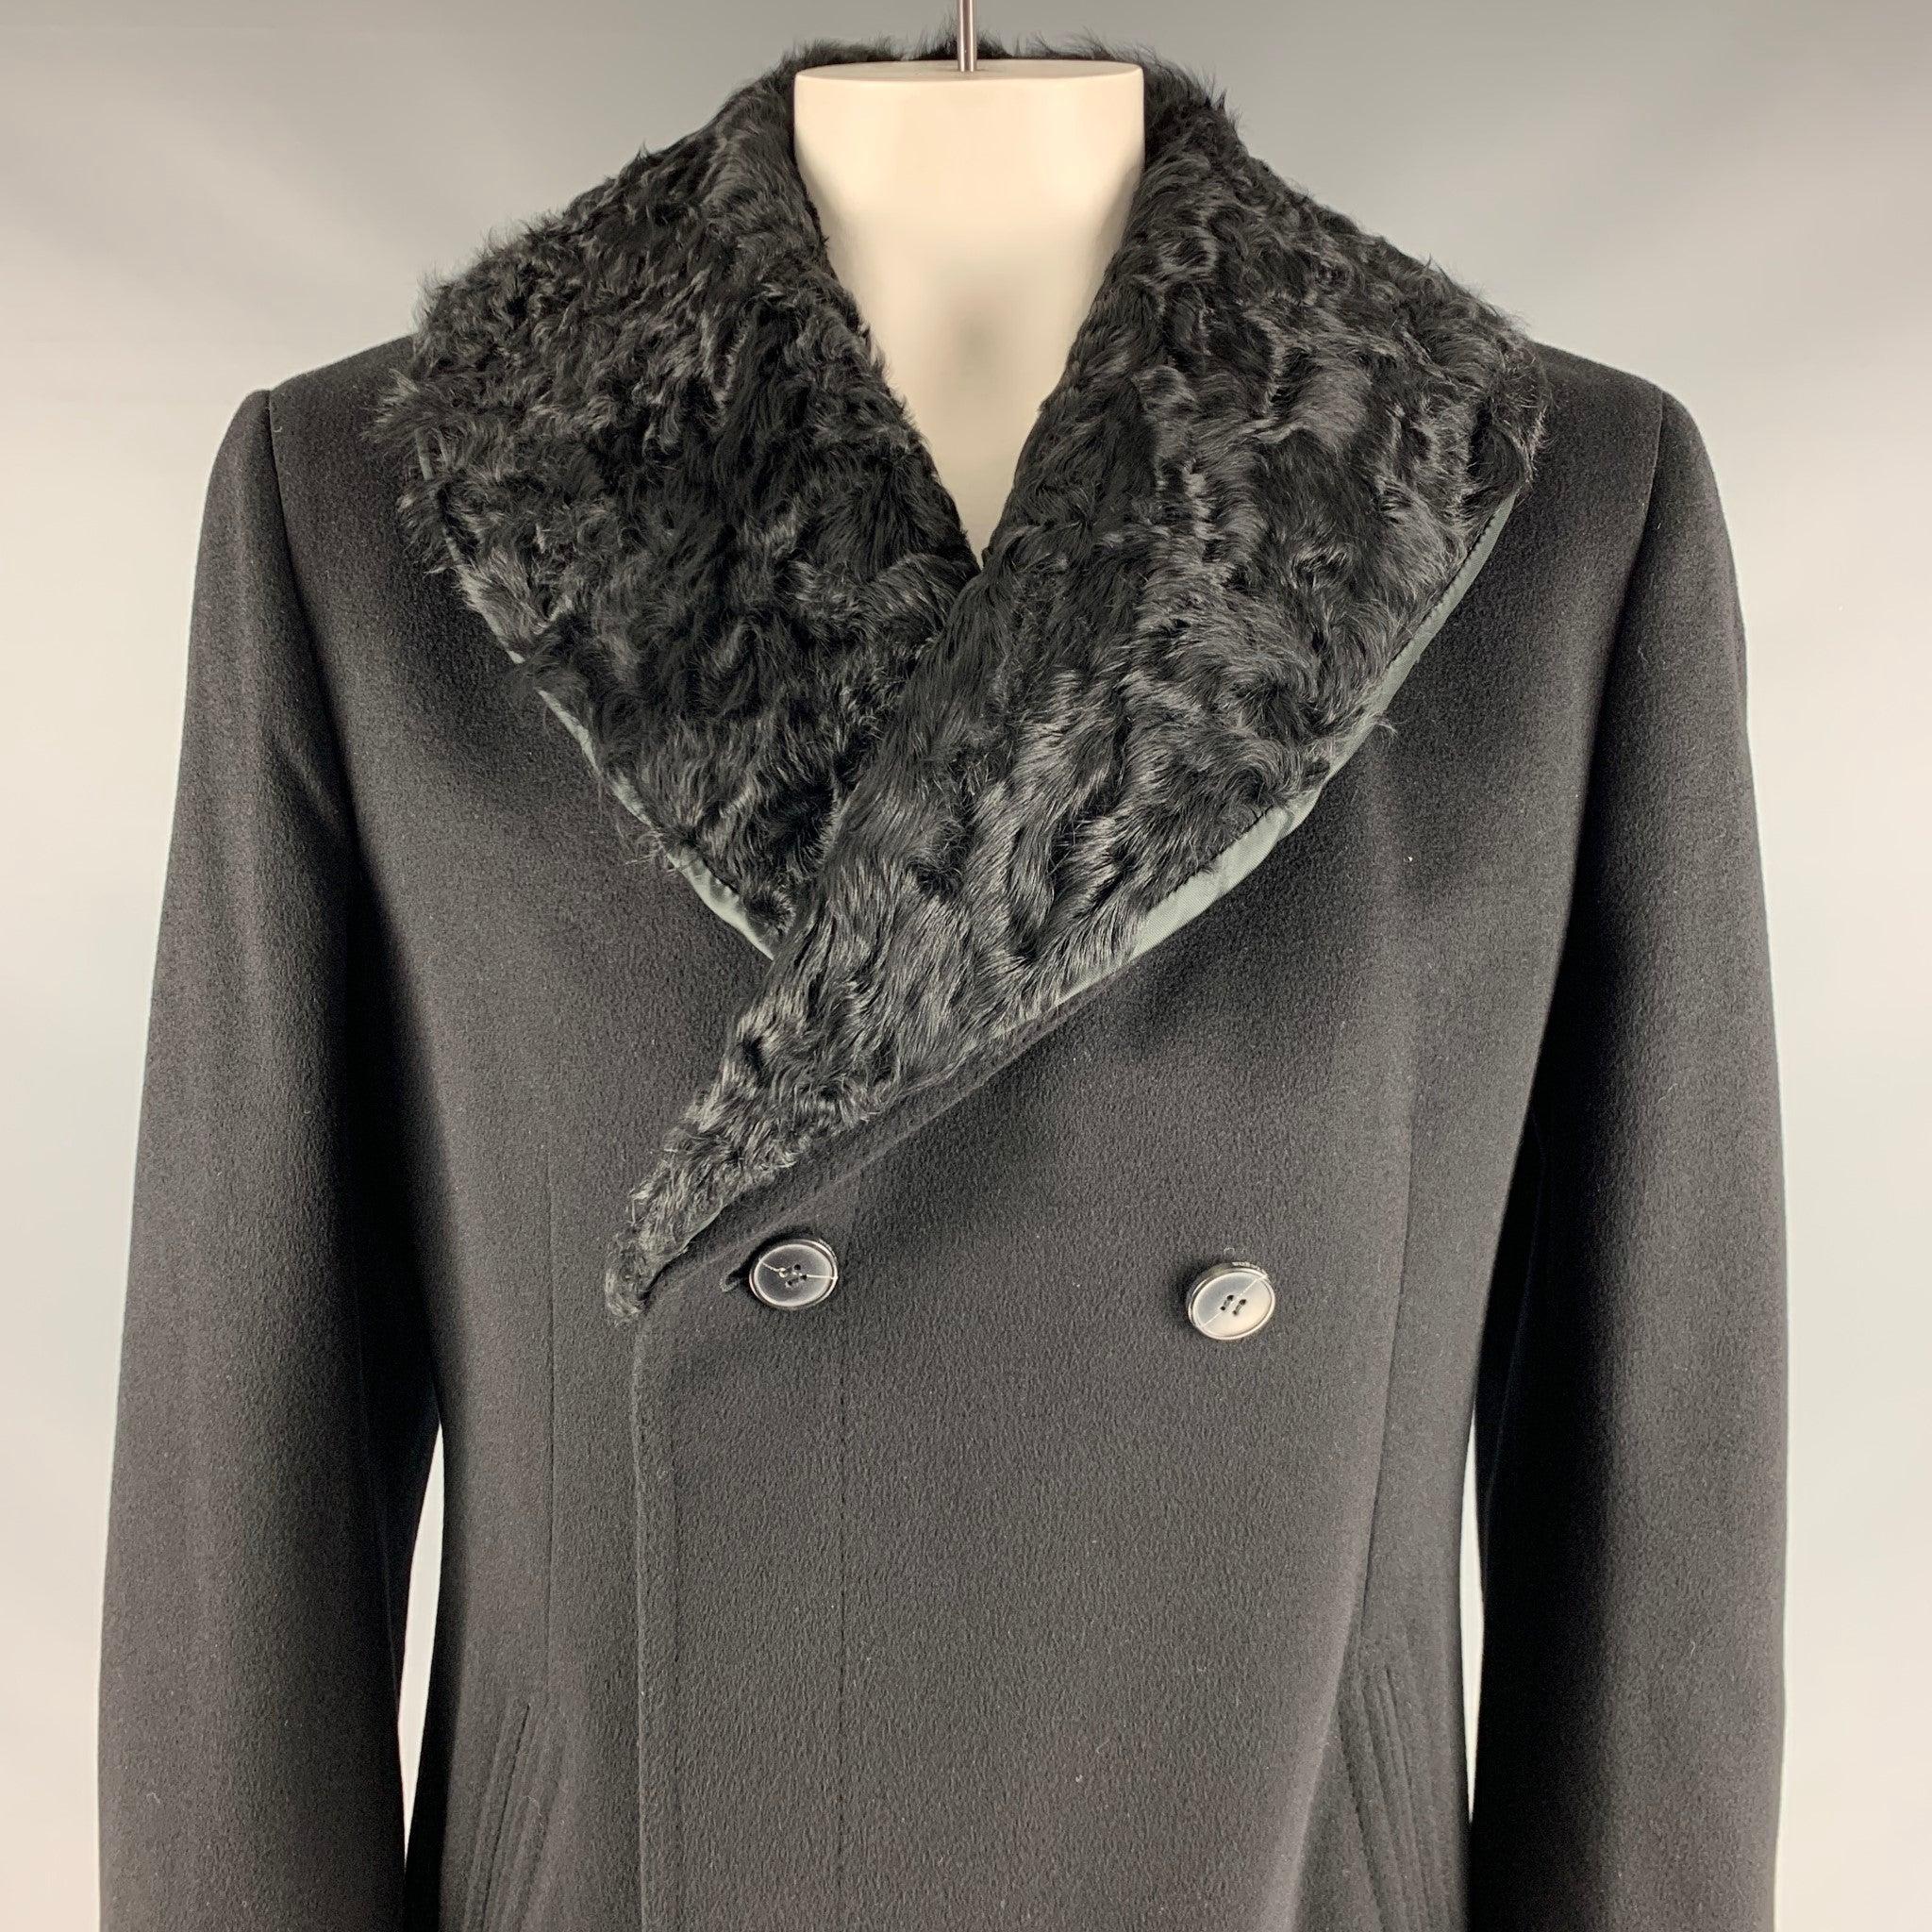 Z ZEGNA coat
in a black cashmere fabric featuring a double breasted style, detachable fur collar, and a button closure. Made in Italy.Excellent Pre-Owned Condition. 

Marked:   IT 56 

Measurements: 
 
Shoulder: 18 inches Chest: 46 inches Sleeve: 26